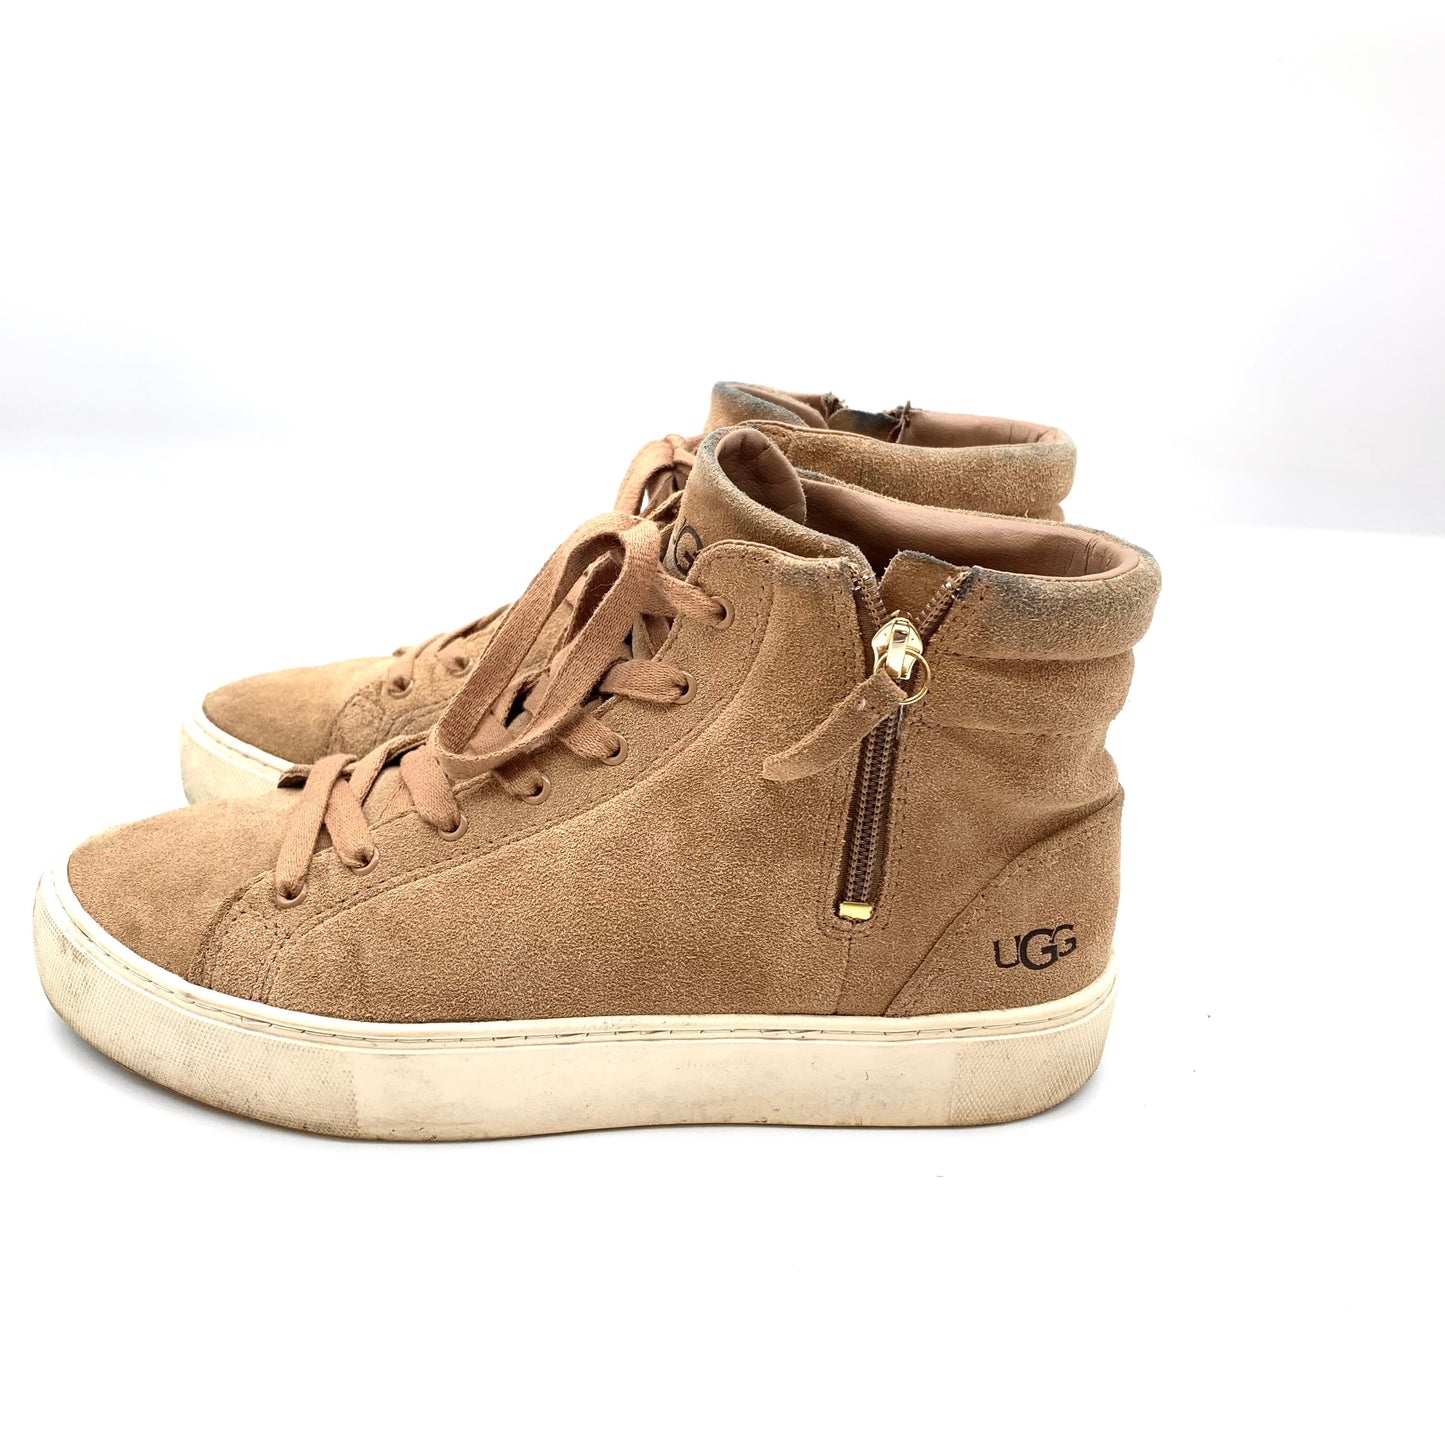 Shoes Sneakers By Ugg  Size: 9